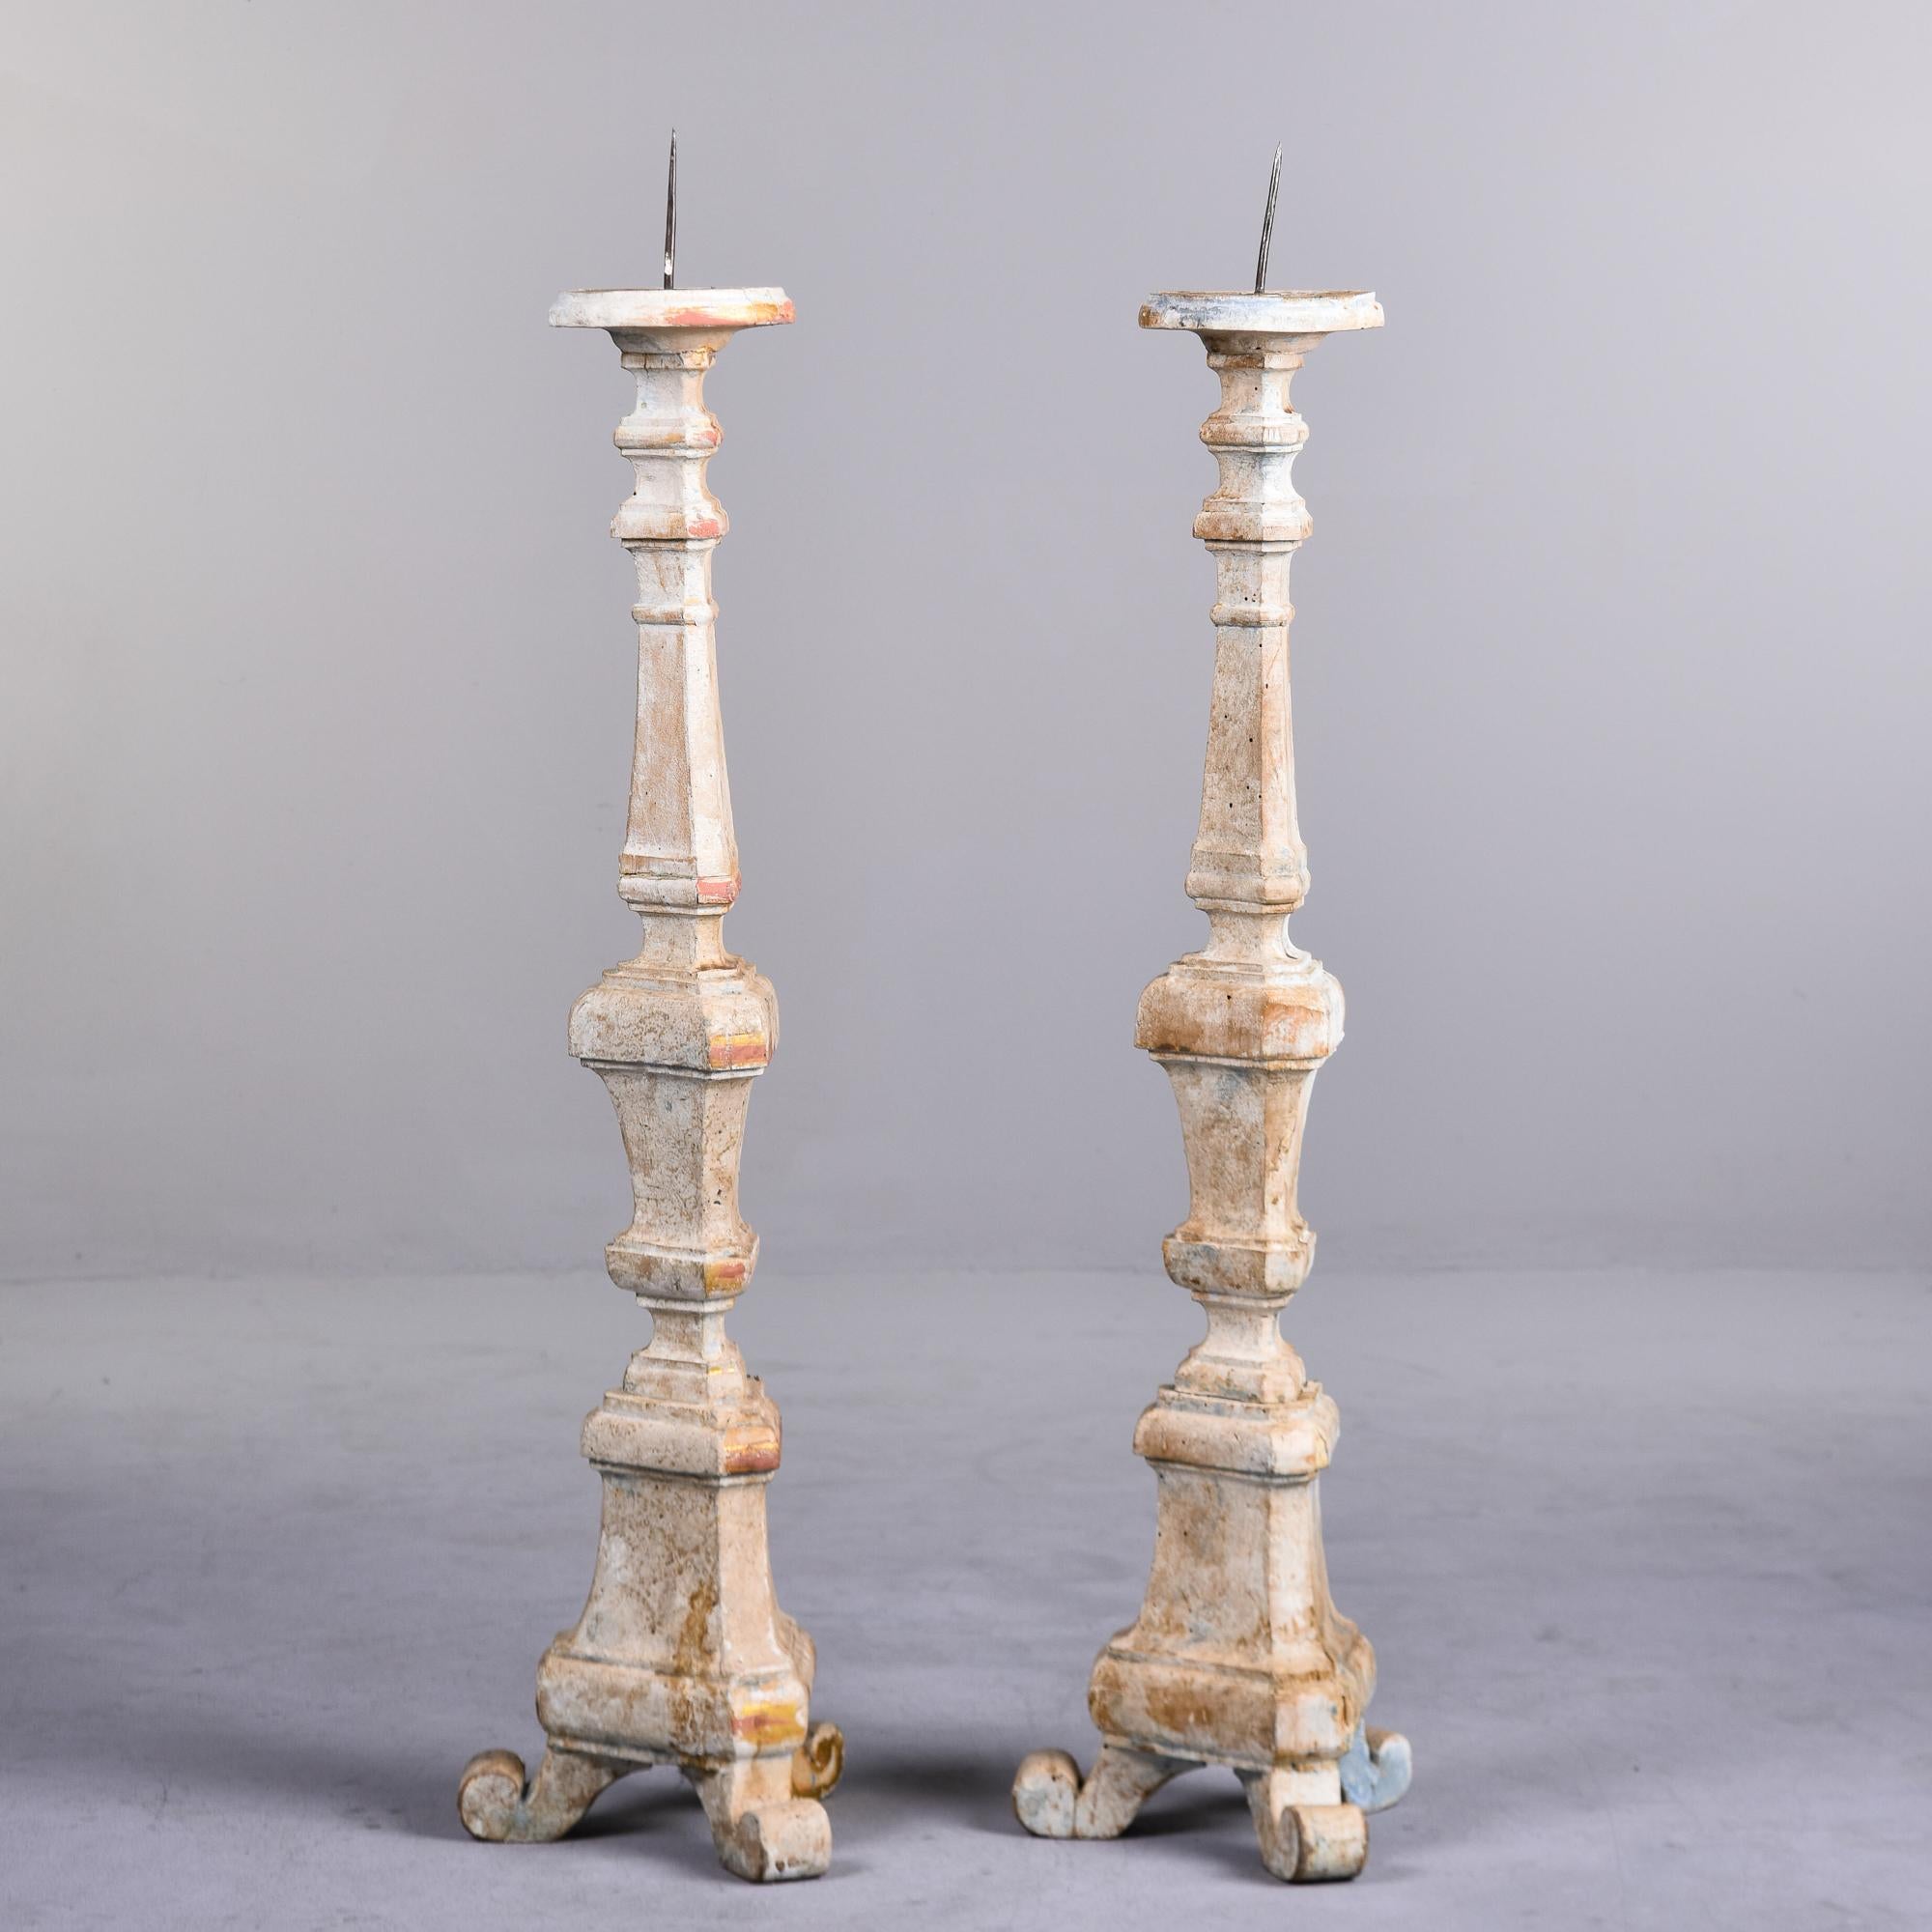 Found in Italy, this pair of carved and painted pine pricket sticks date from about 1870s. Curved, three footed base with antique white painted finish with some gilded paint showing through. Unknown maker. Priced and sold as a pair.